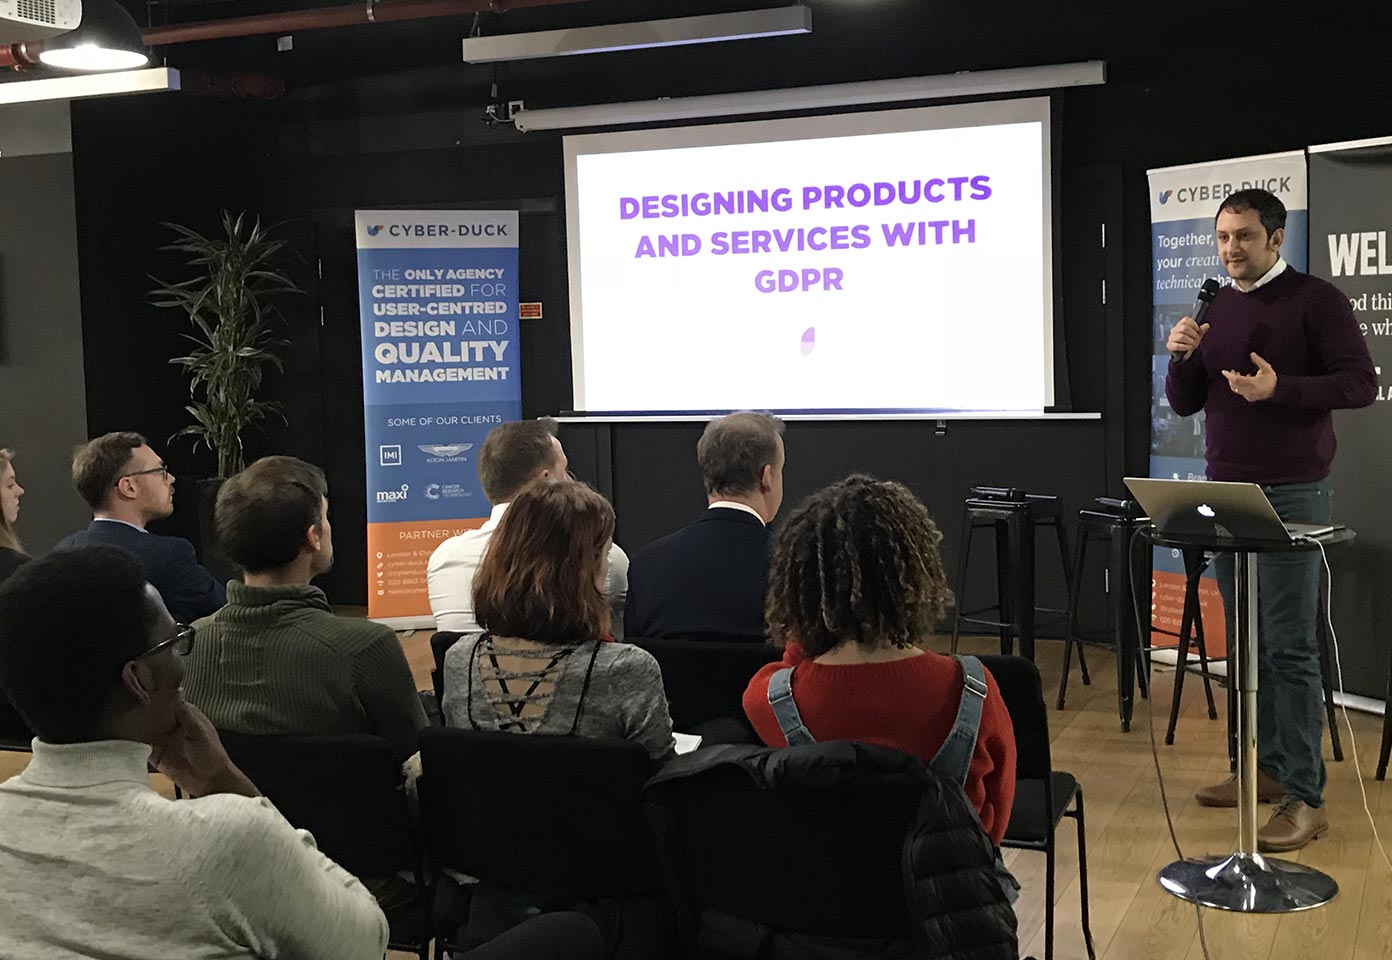 Photo of Cyber-Duck CEO Danny standing in front of an audience with a microphone in his hand. There is a projector showing 'Designing products and services with GDPR' as the title.